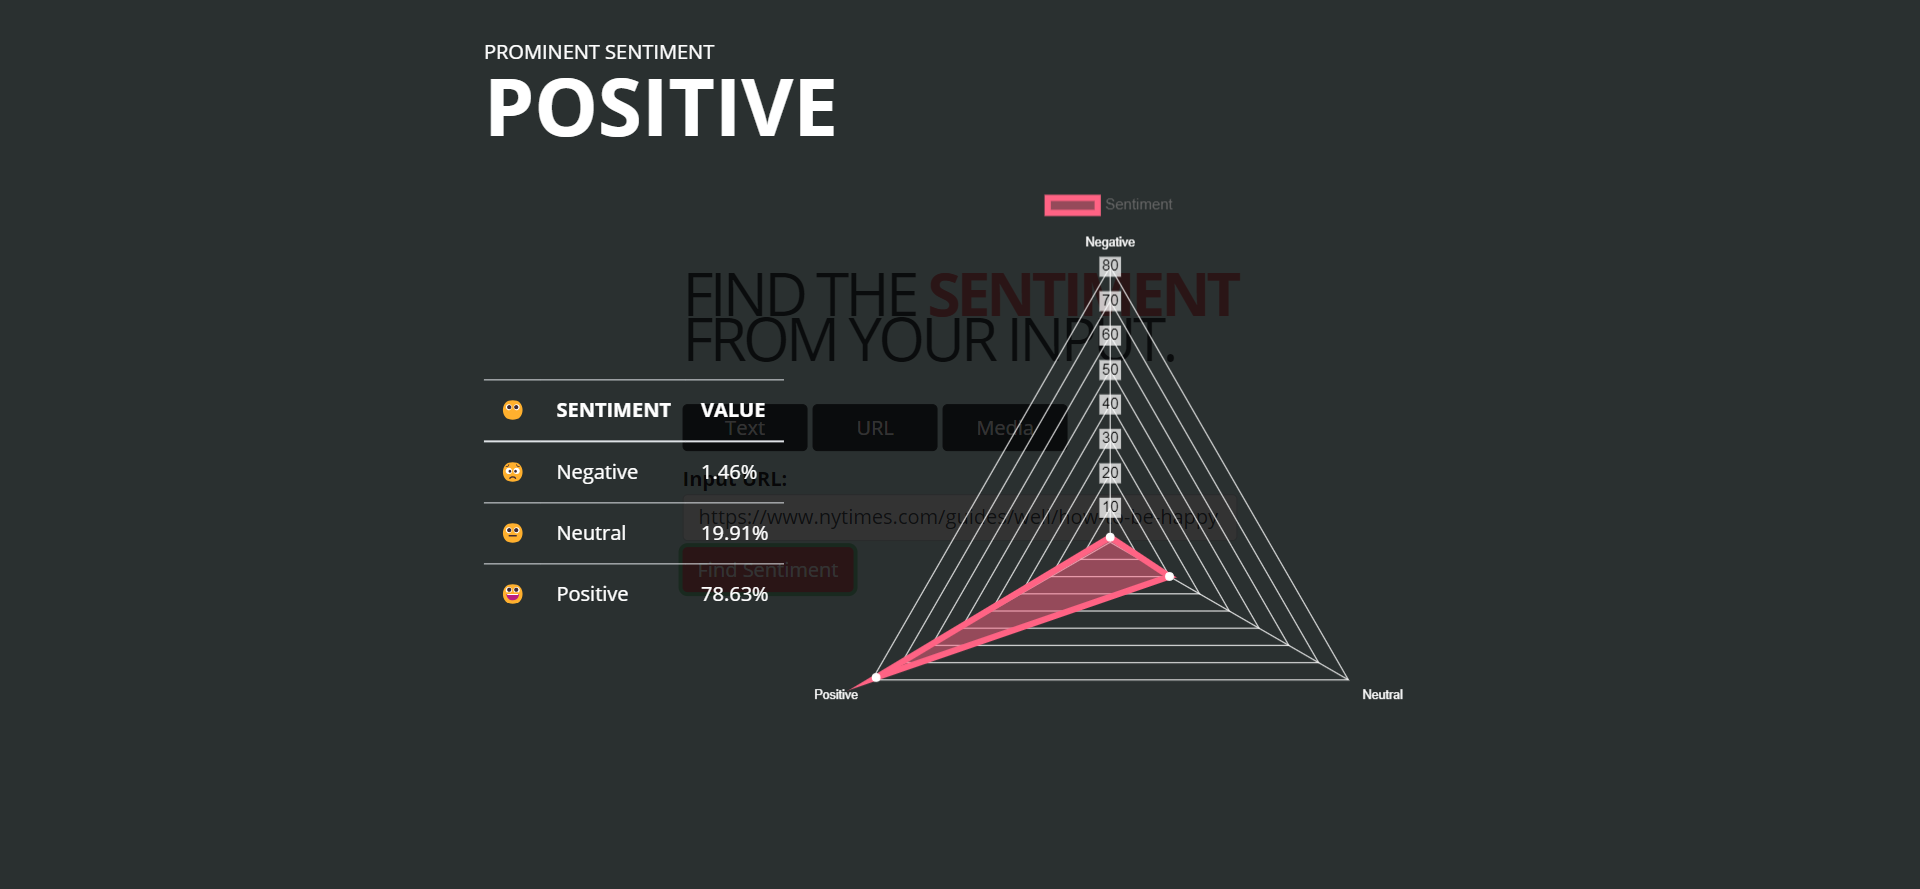 sentiment analysis for a url